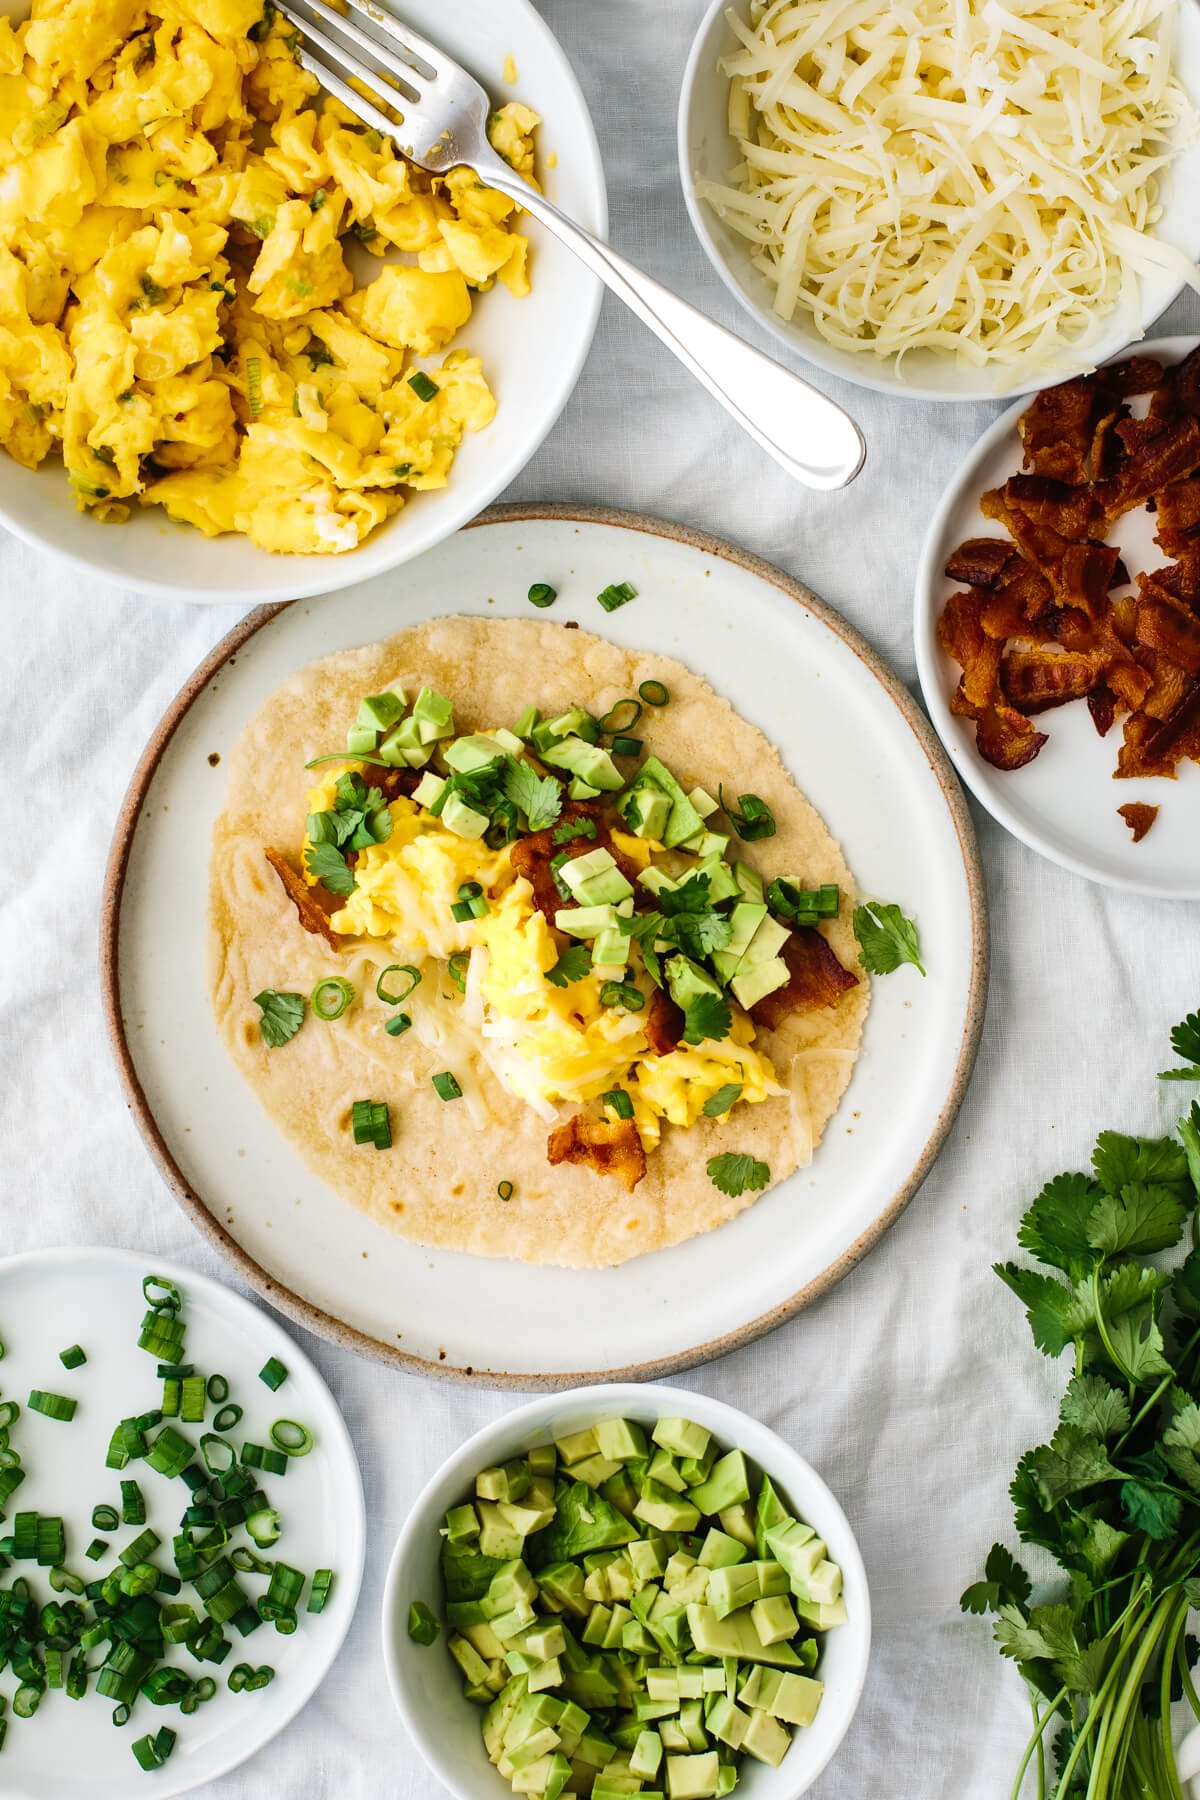 Breakfast taco assembly on a table.